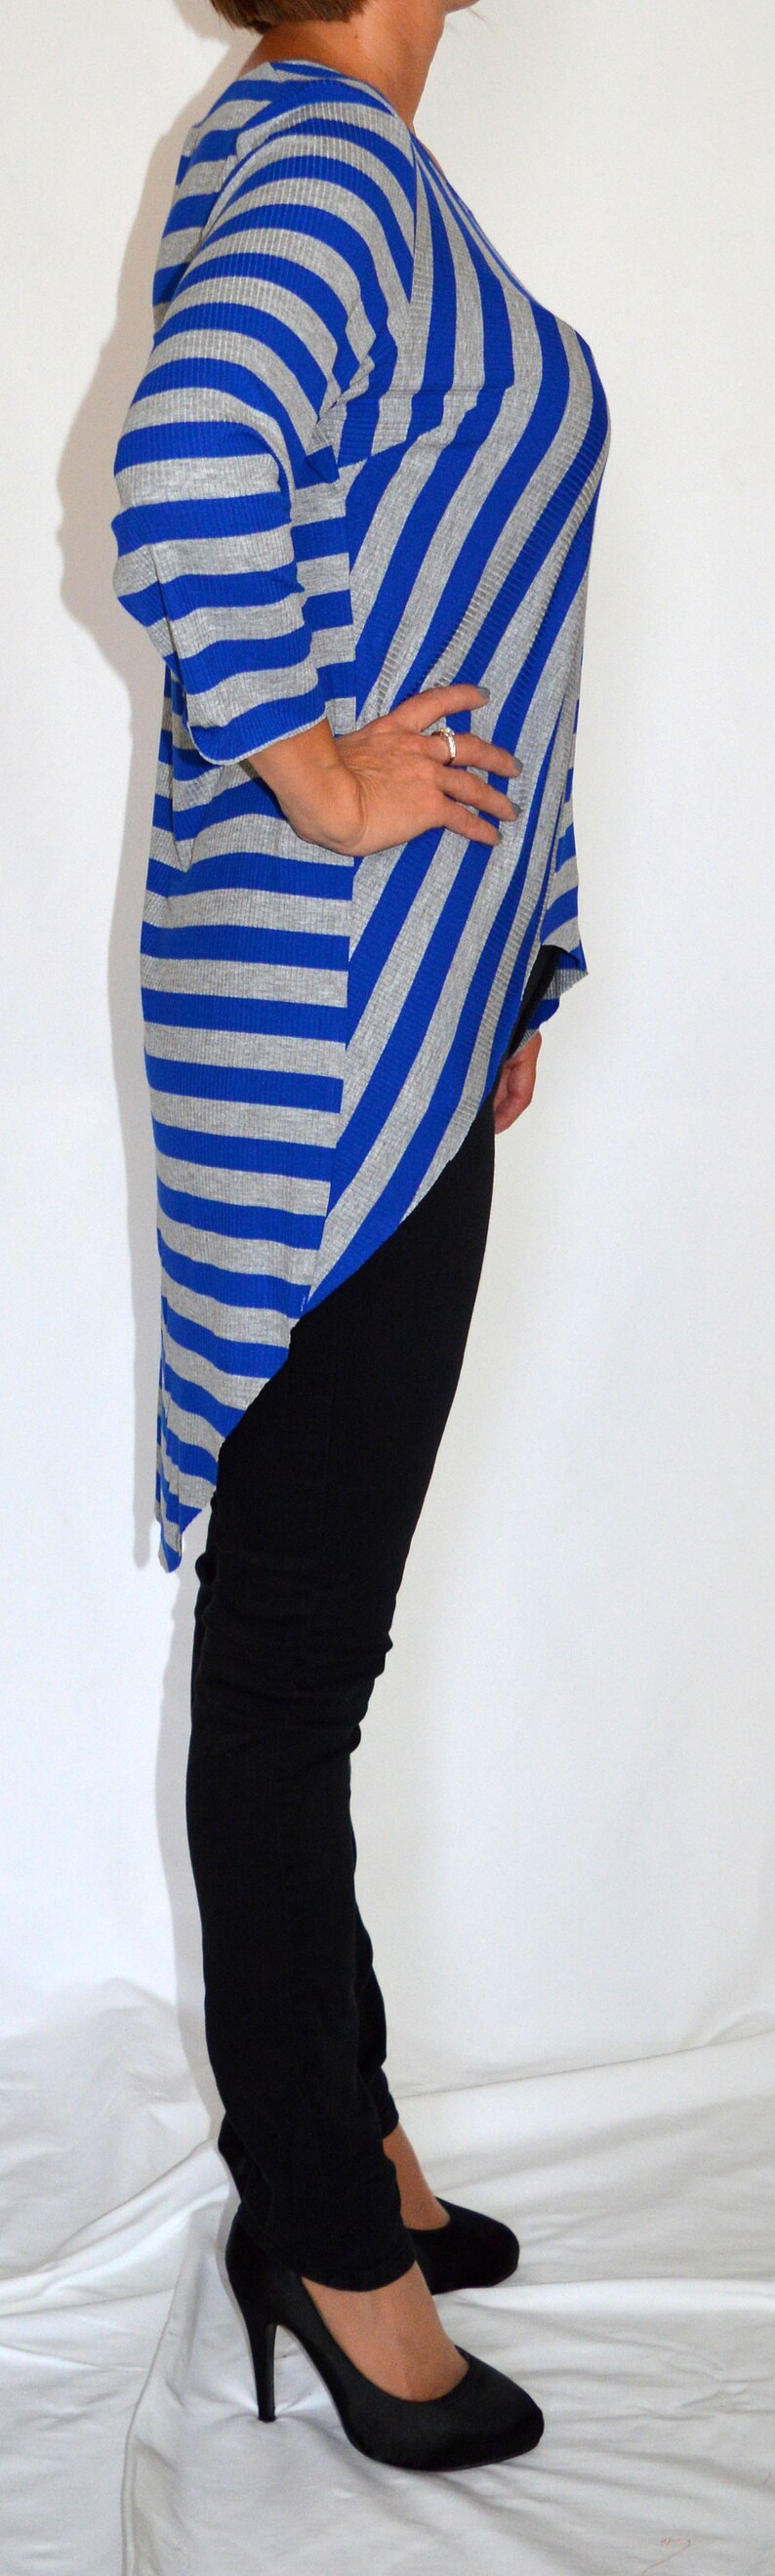 Grey, blue, striped, jersey, tunic, top, comfortable top Size UK 14, 16 / US 8, 10, 12 image 3